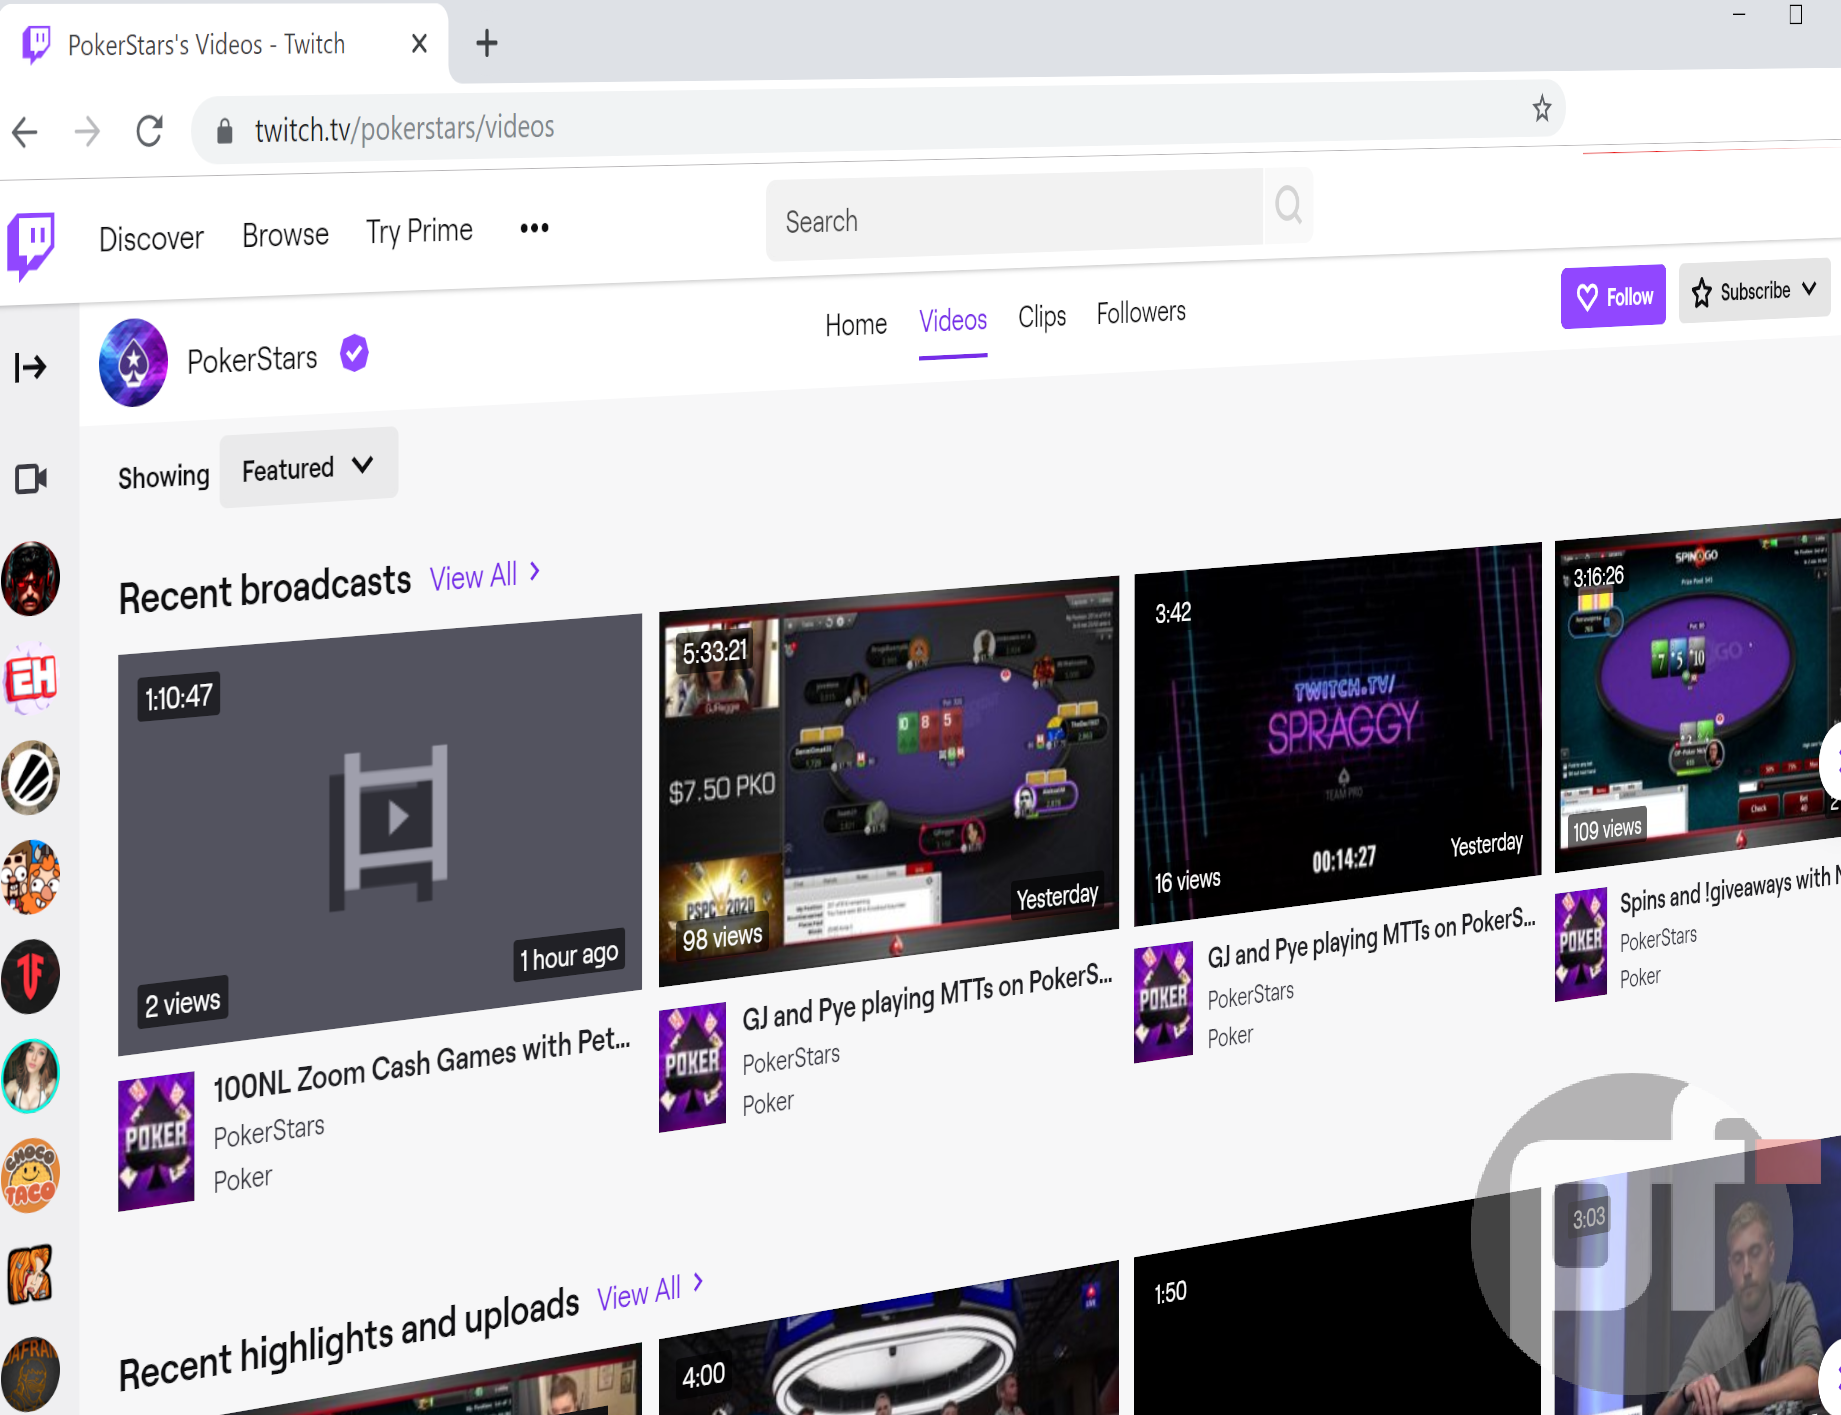 PokerStars has successfully added an in-client Twitch integration feature, allowing players to sync their Twitch account with PokerStars directly on its online poker platform.